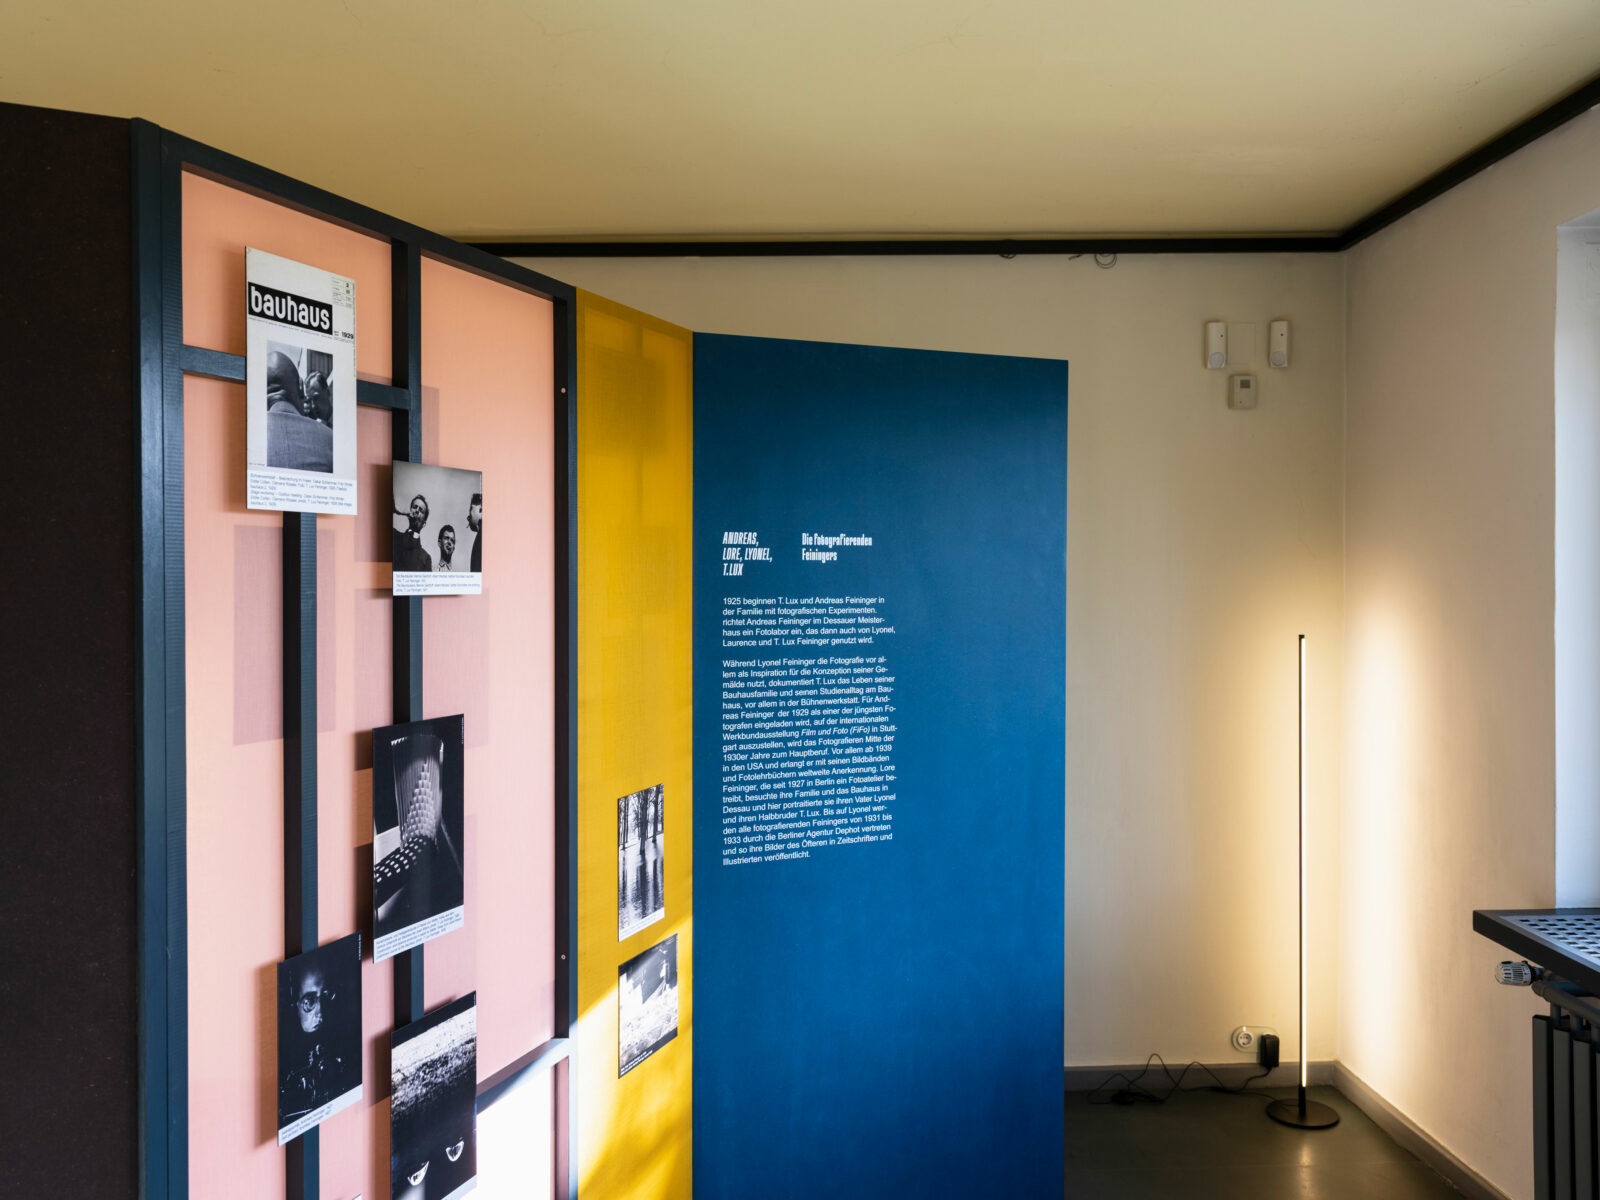 Exhibition walls covered with pink and yellow fabric bear photos and an explanatory text.